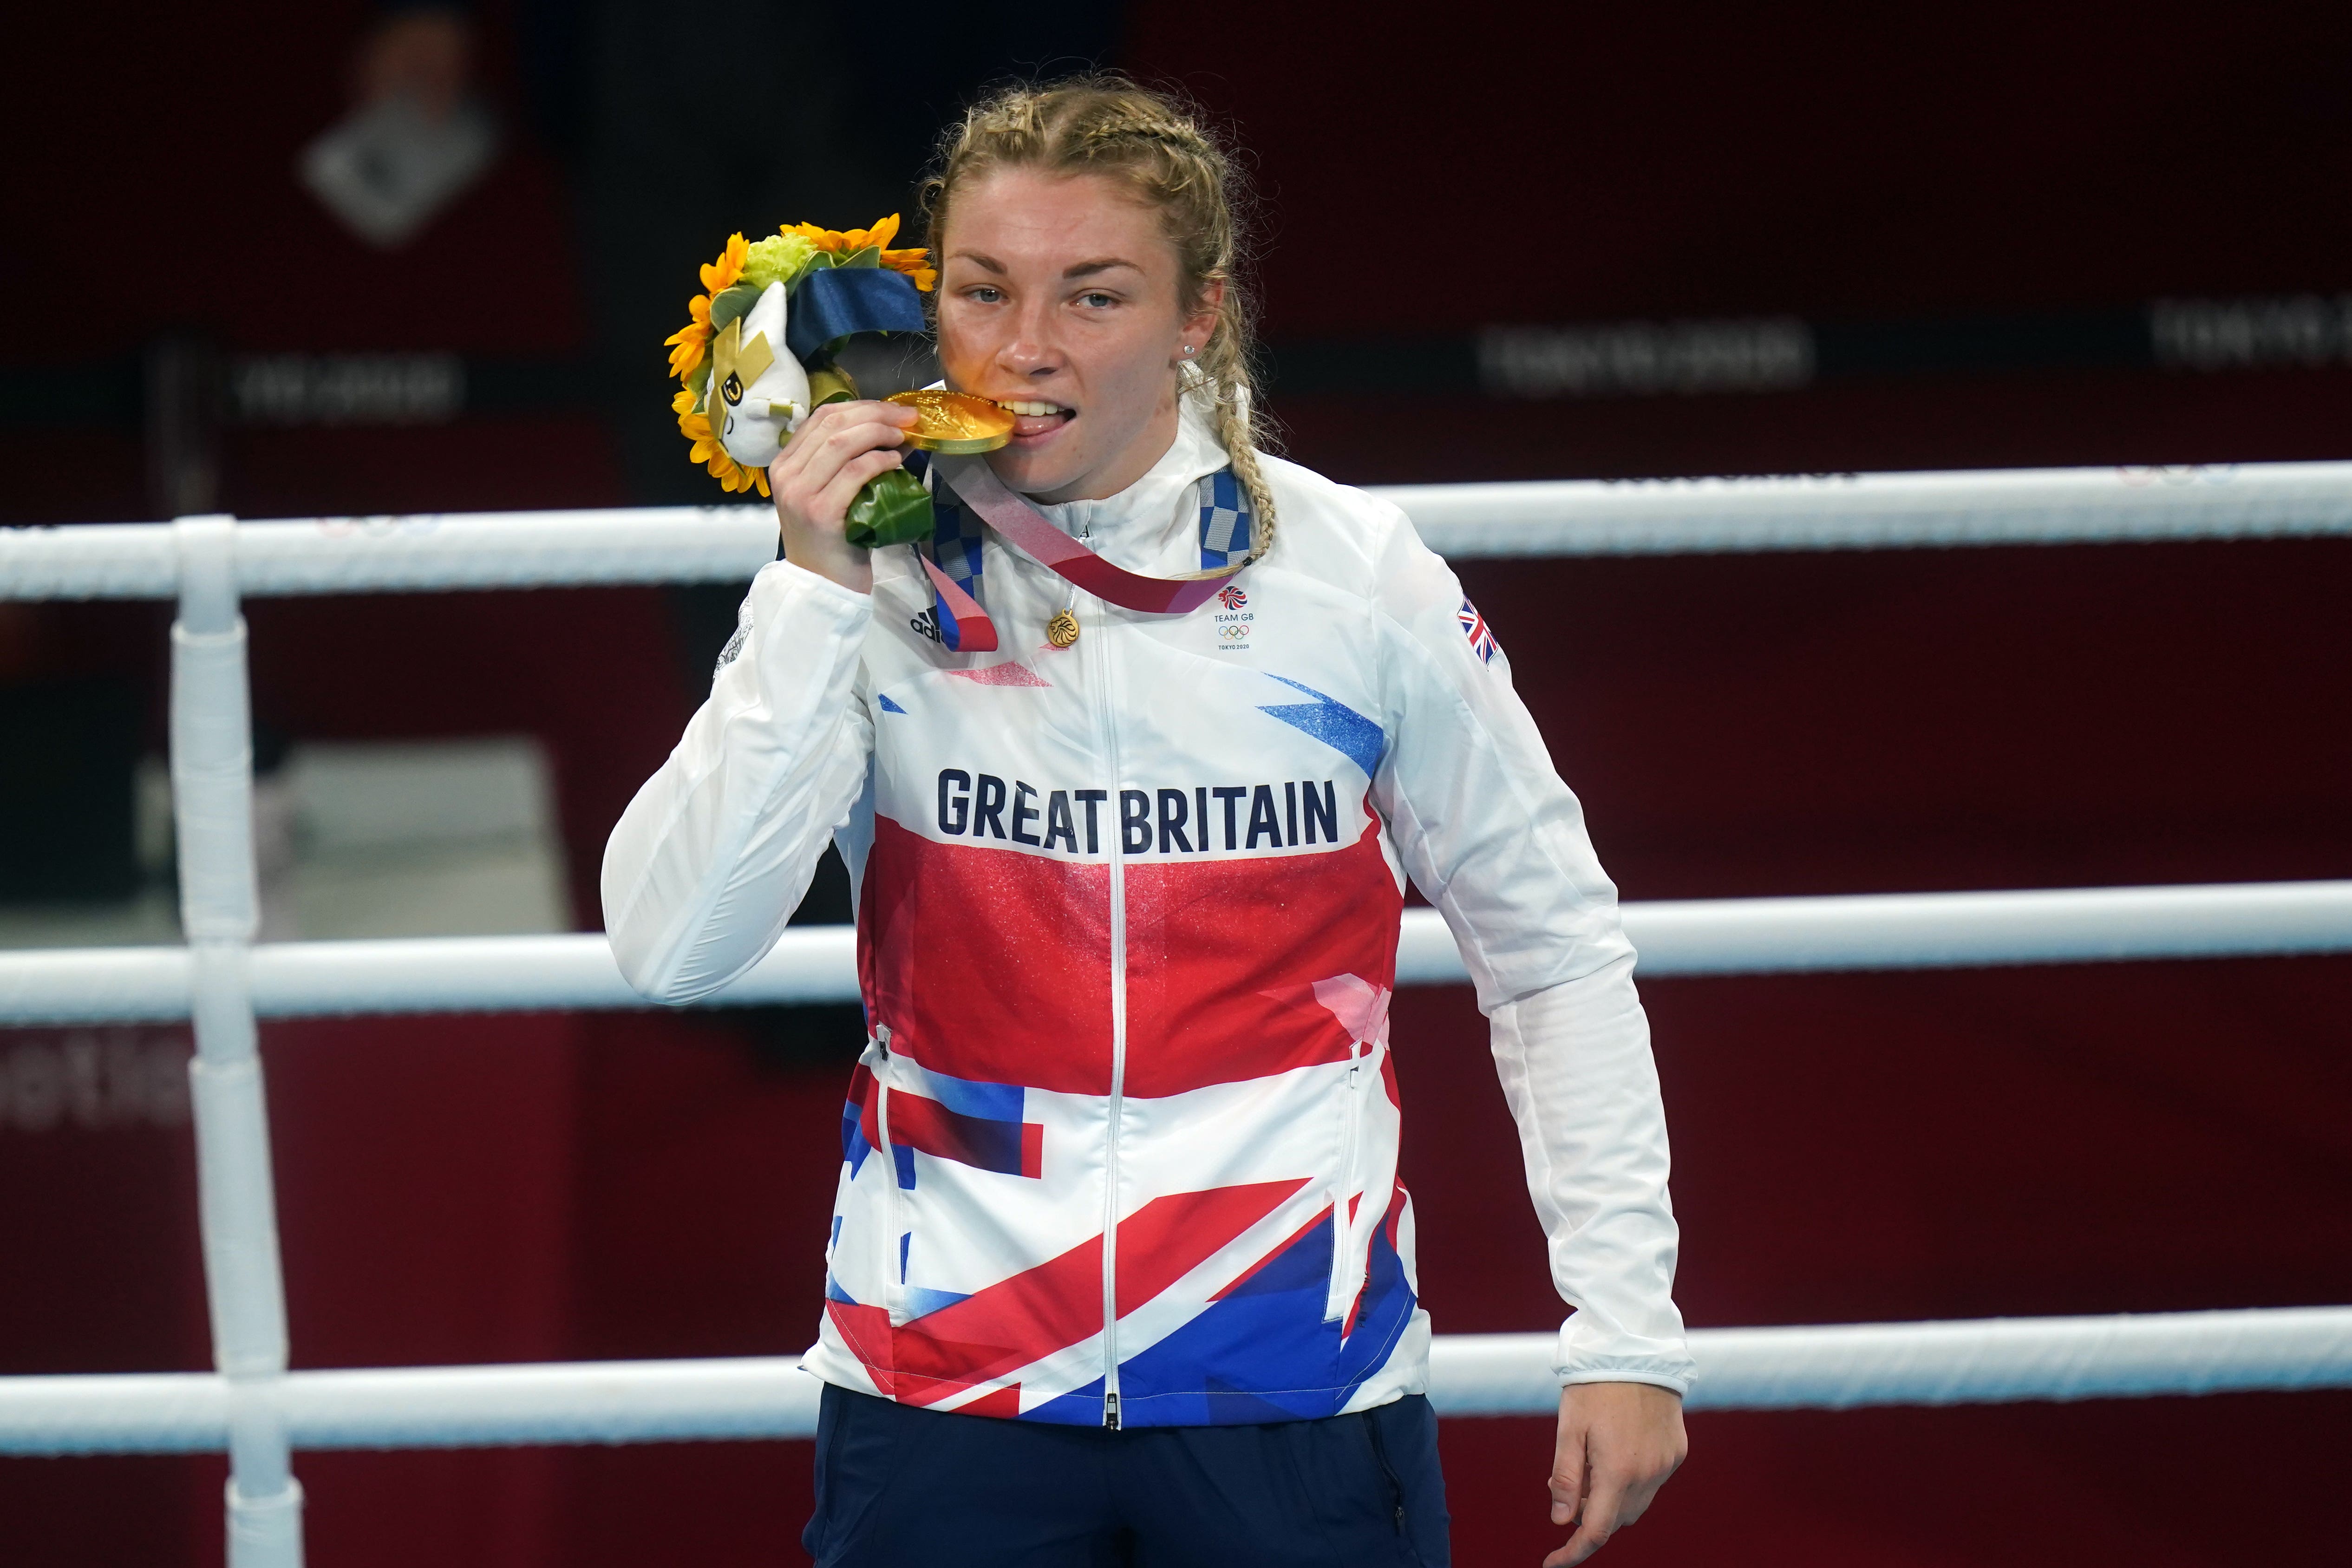 Lauren Price won Olympic gold in the middleweight division at Tokyo 2020